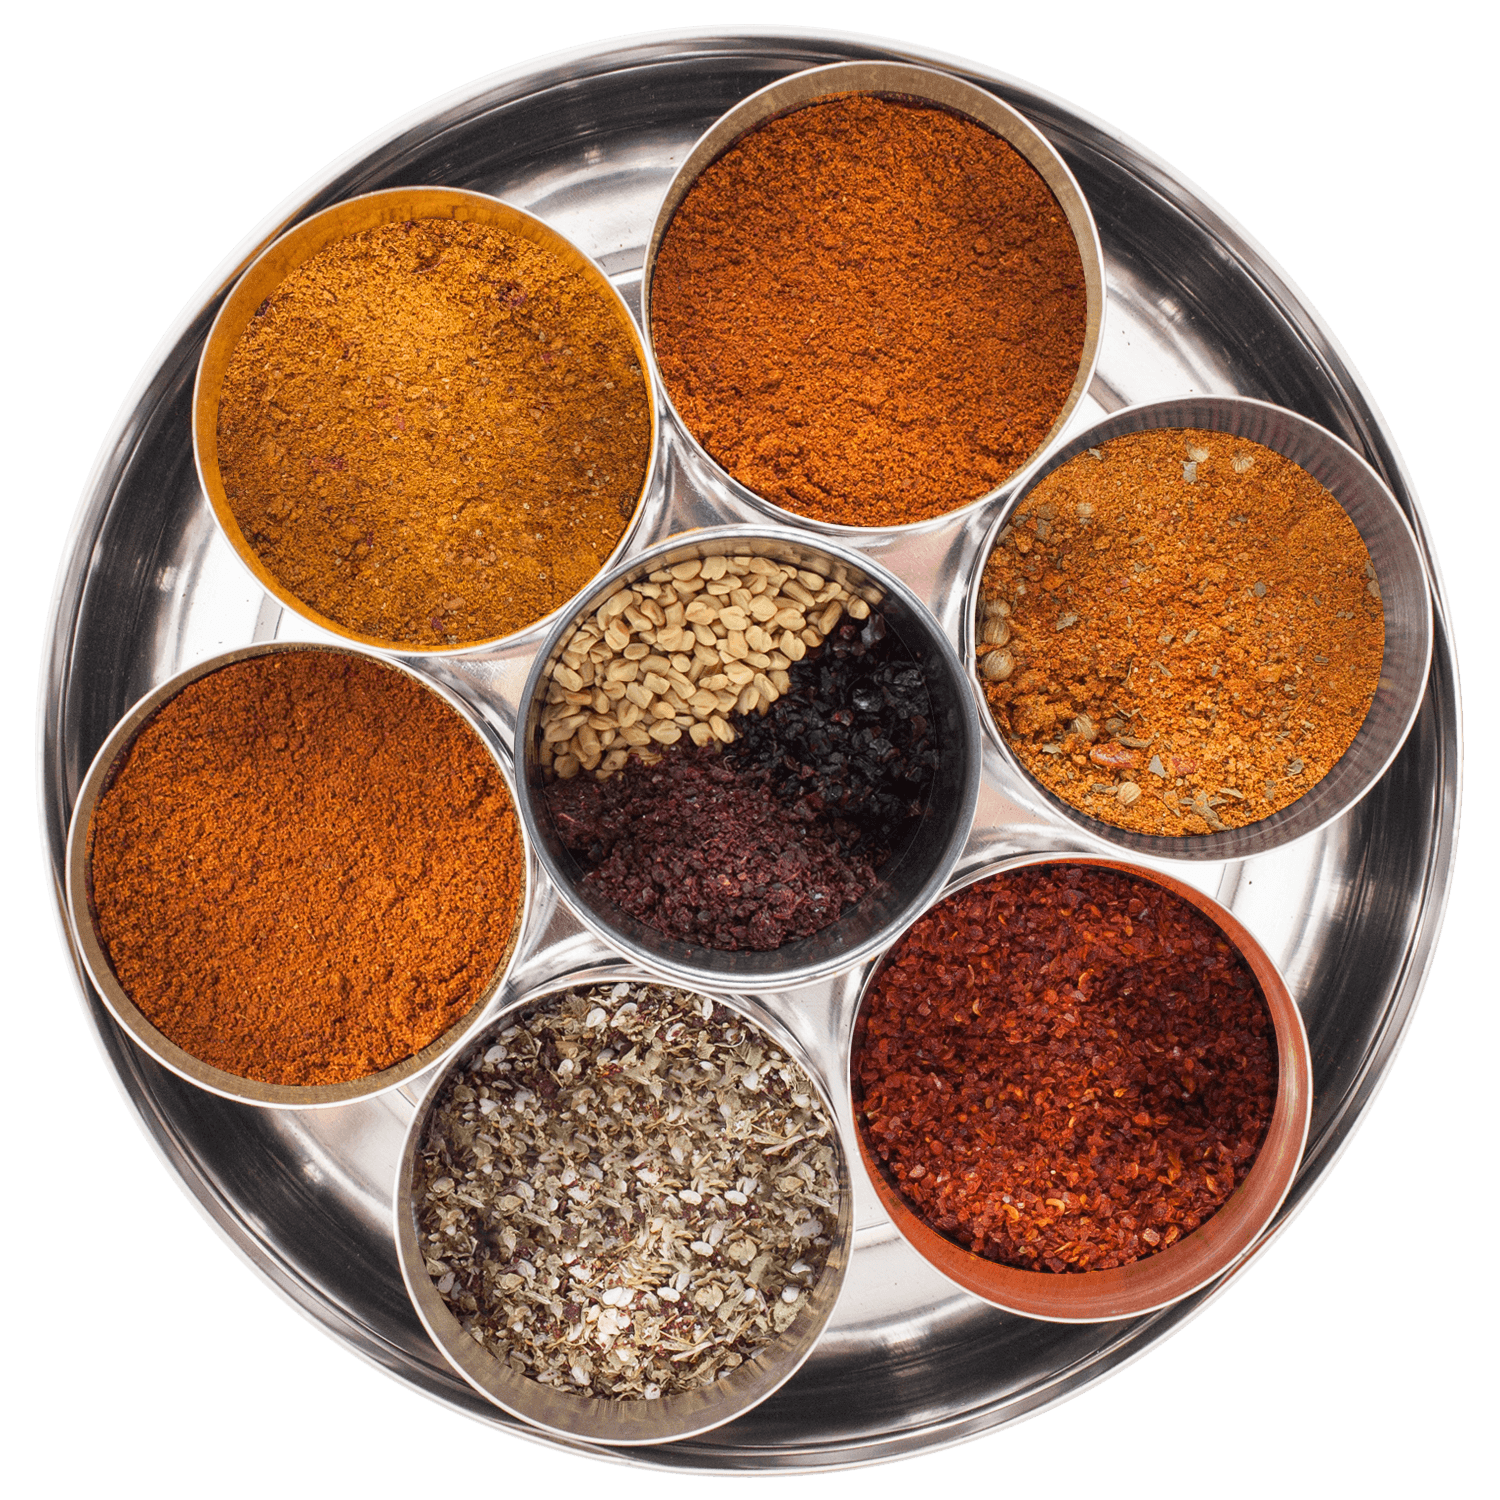 iSpice | 4 Pack of Spice | Amber | Mixed Spices & Seasonings Gift Set | Kosher